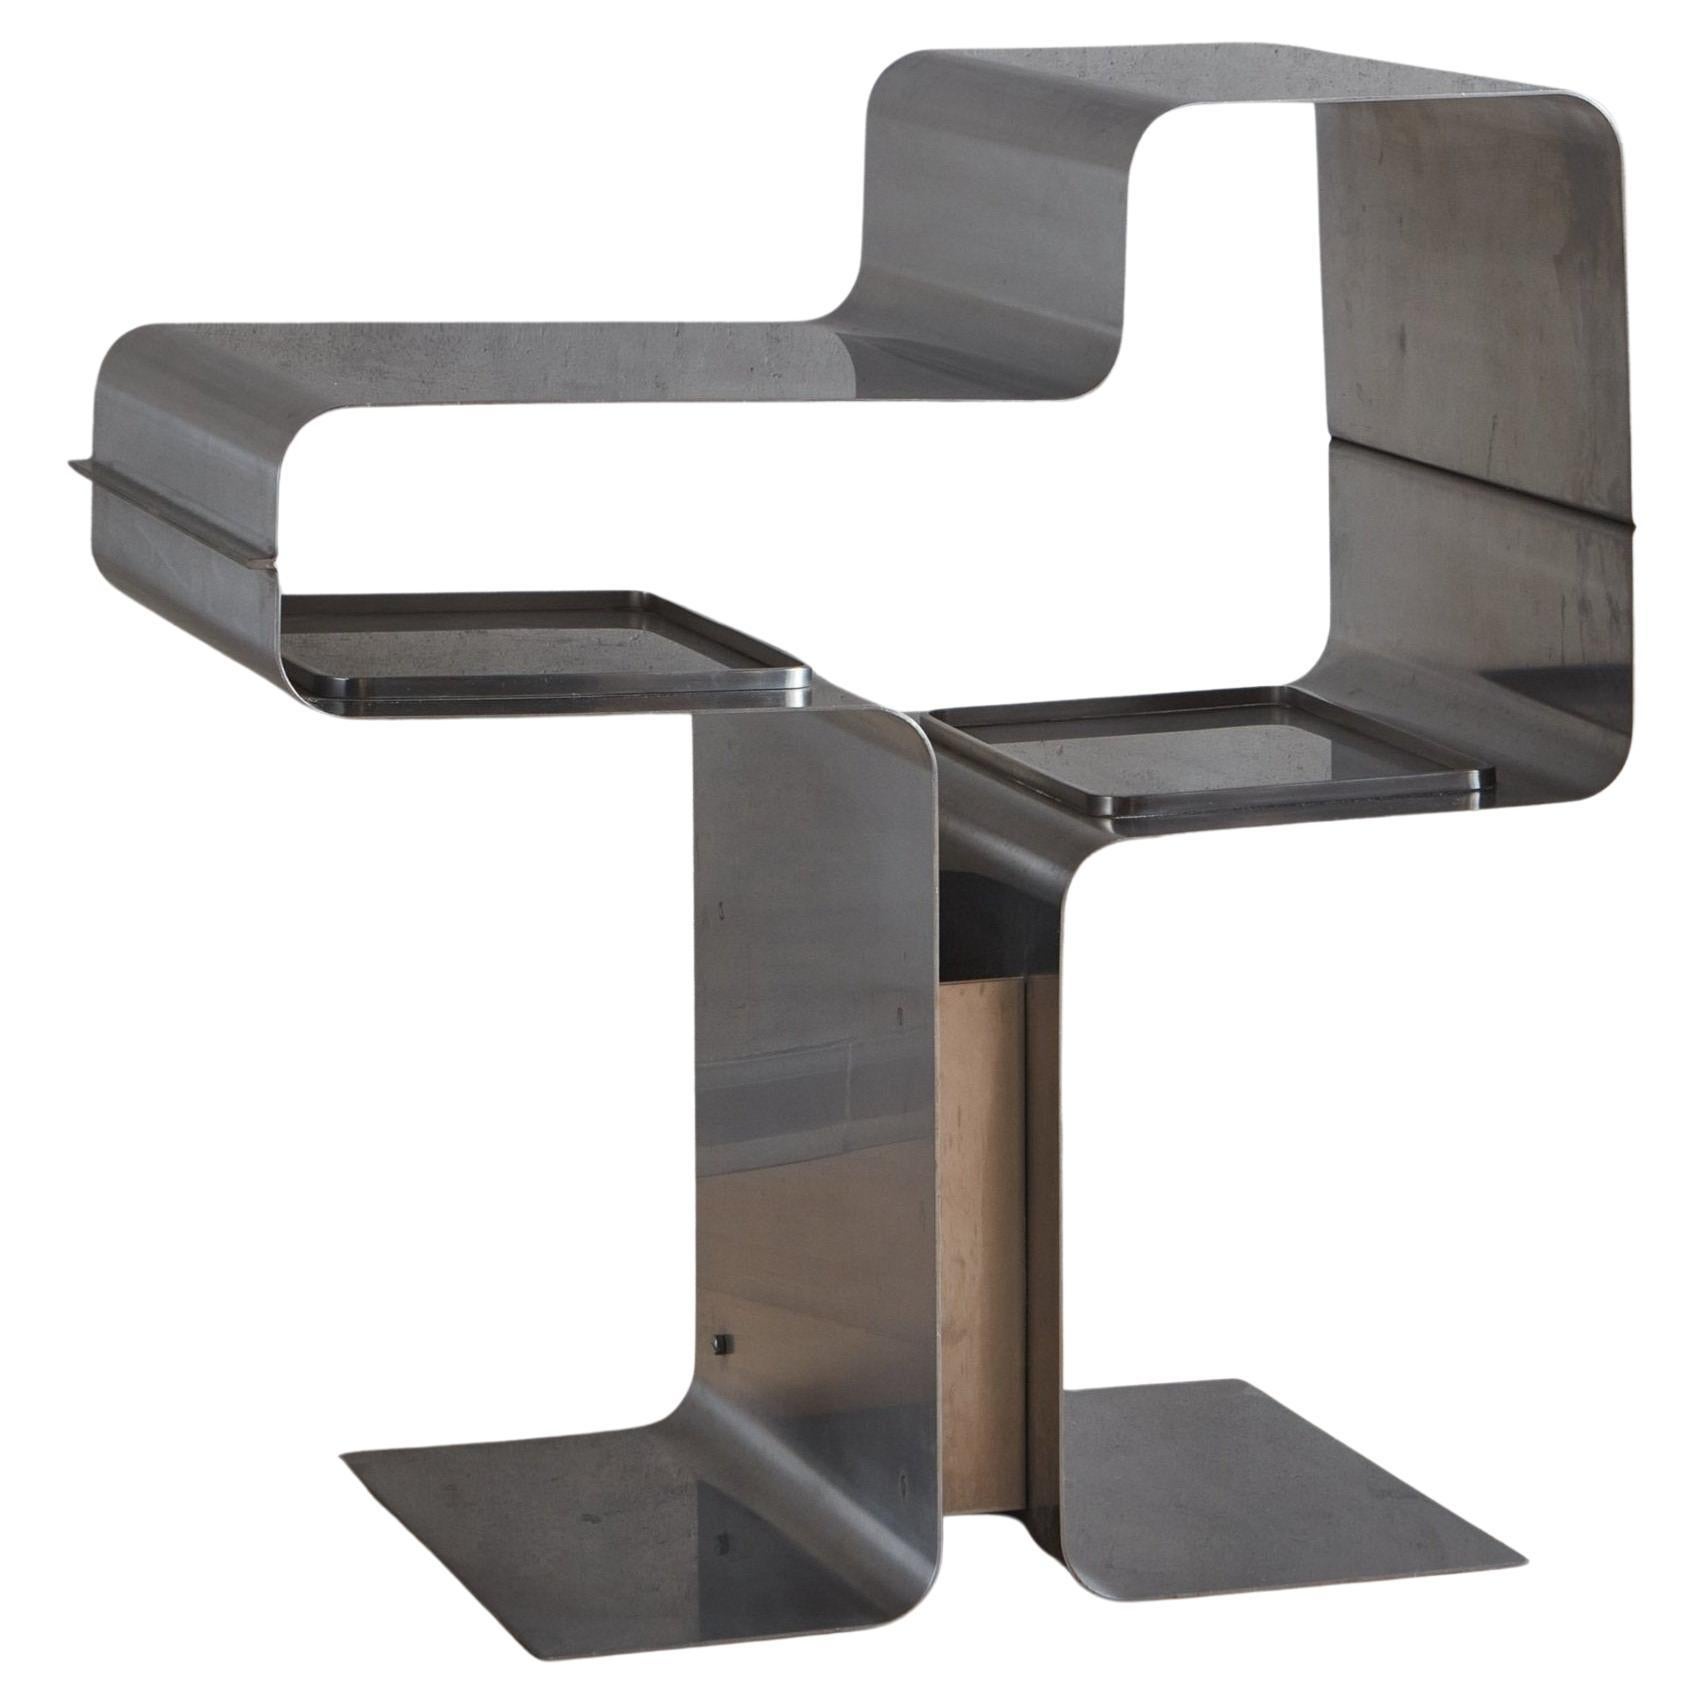 Stainless Steel Console by François Monnet for Kappa, France 1970s